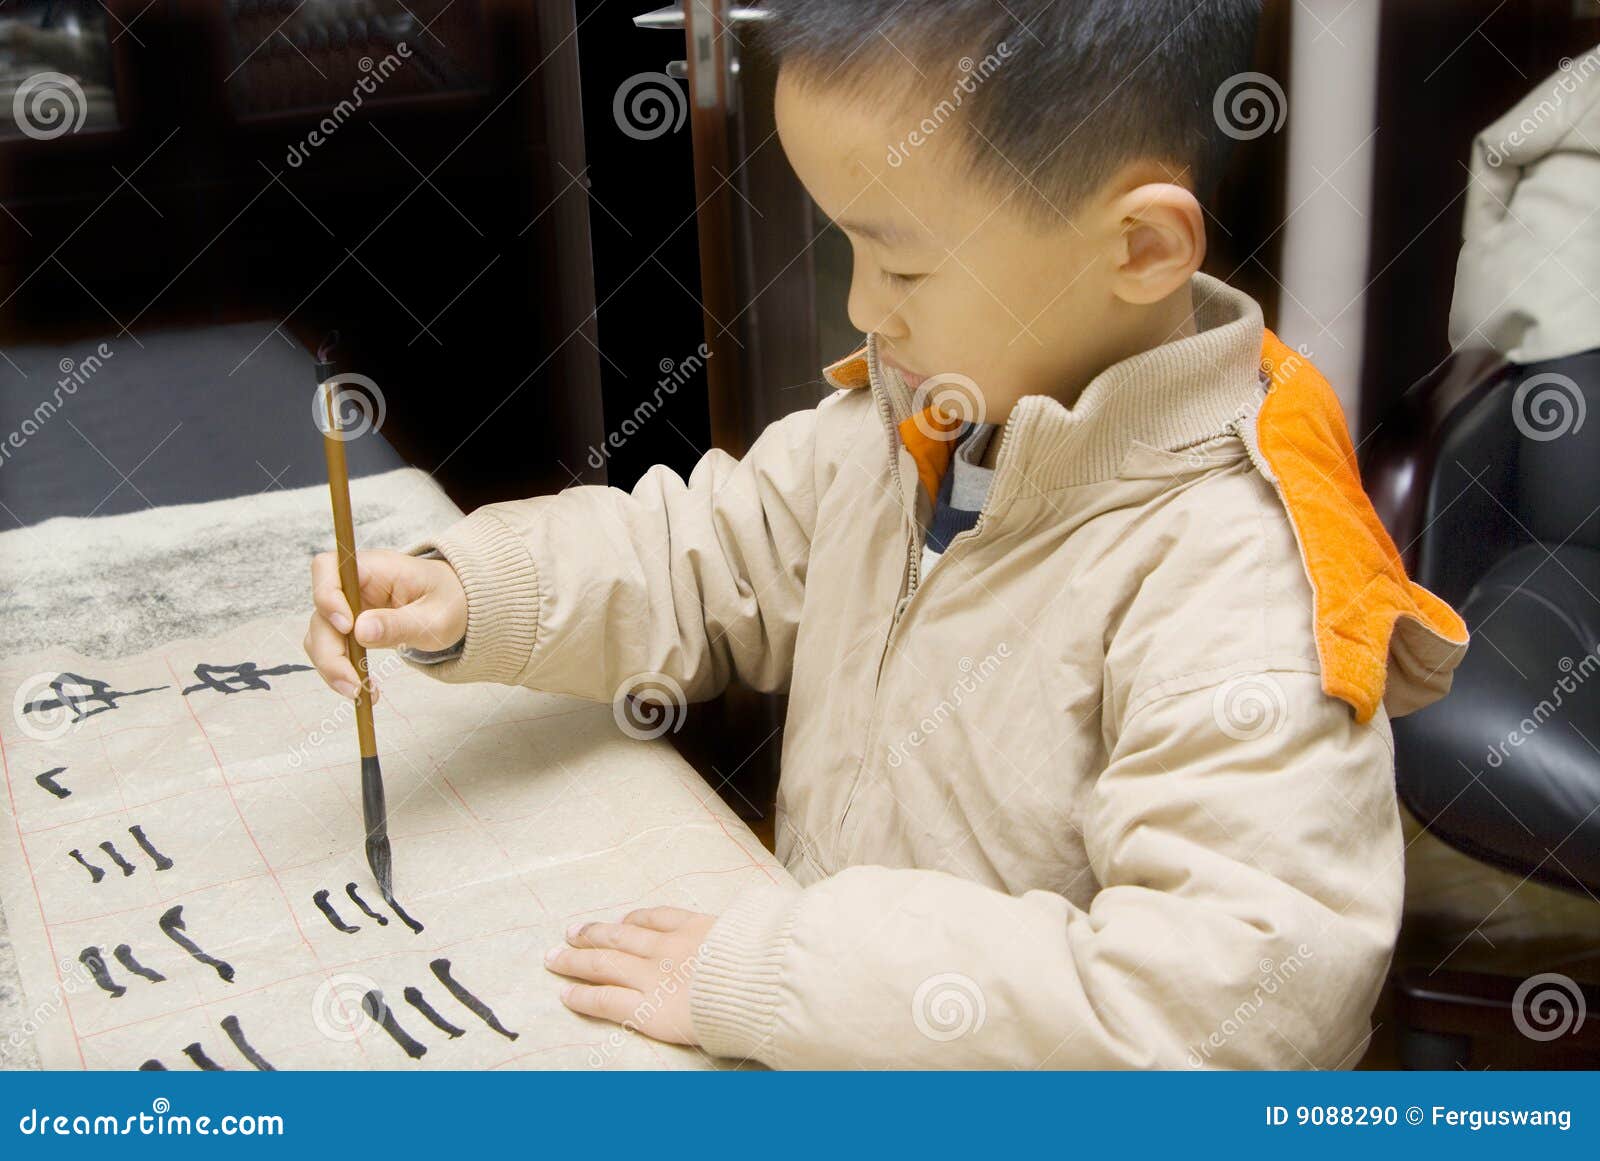 a child writing chinese calligraphy